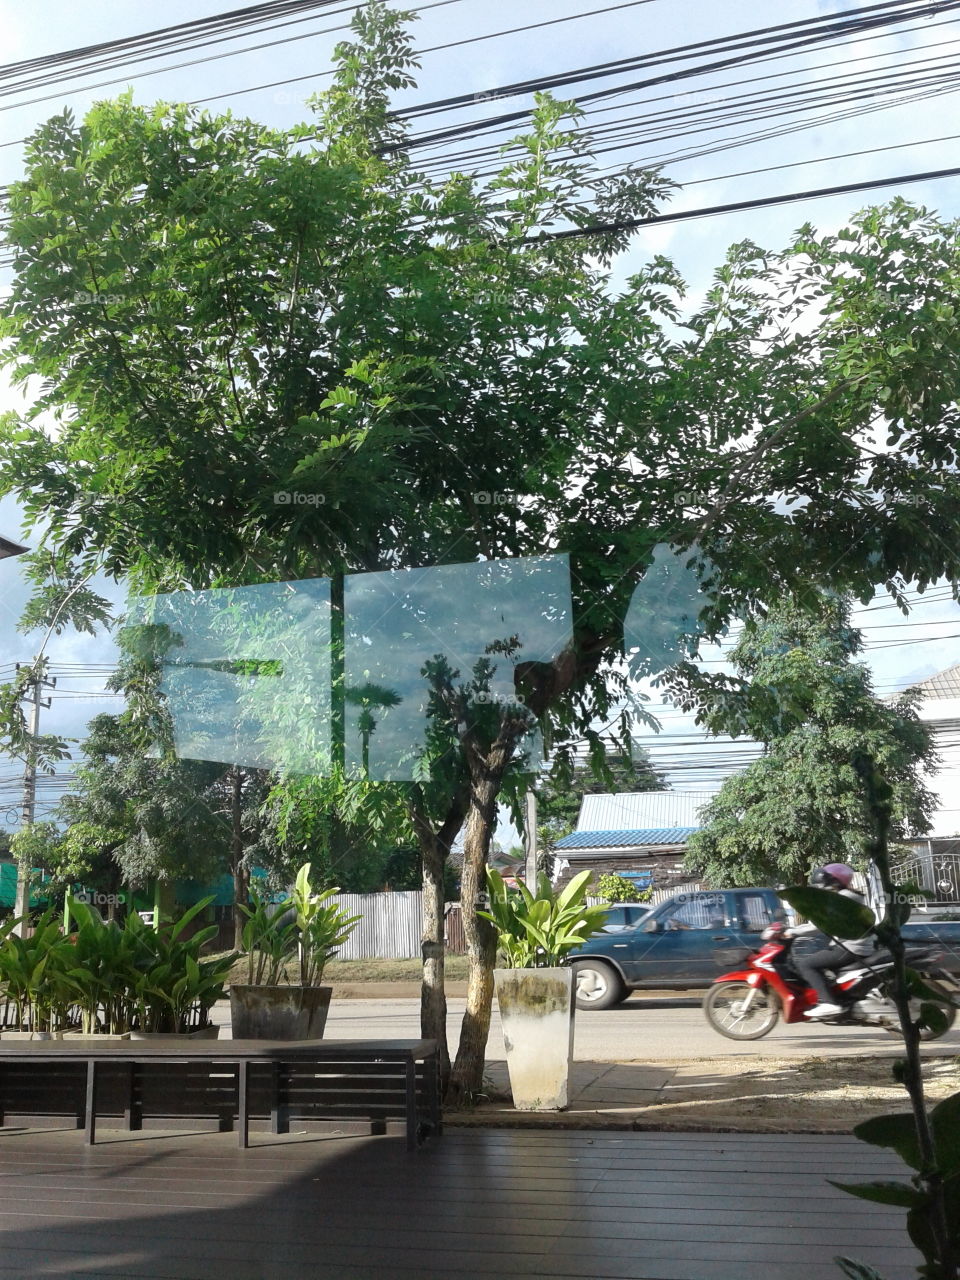 Tree, Environment, Building, Architecture, Road